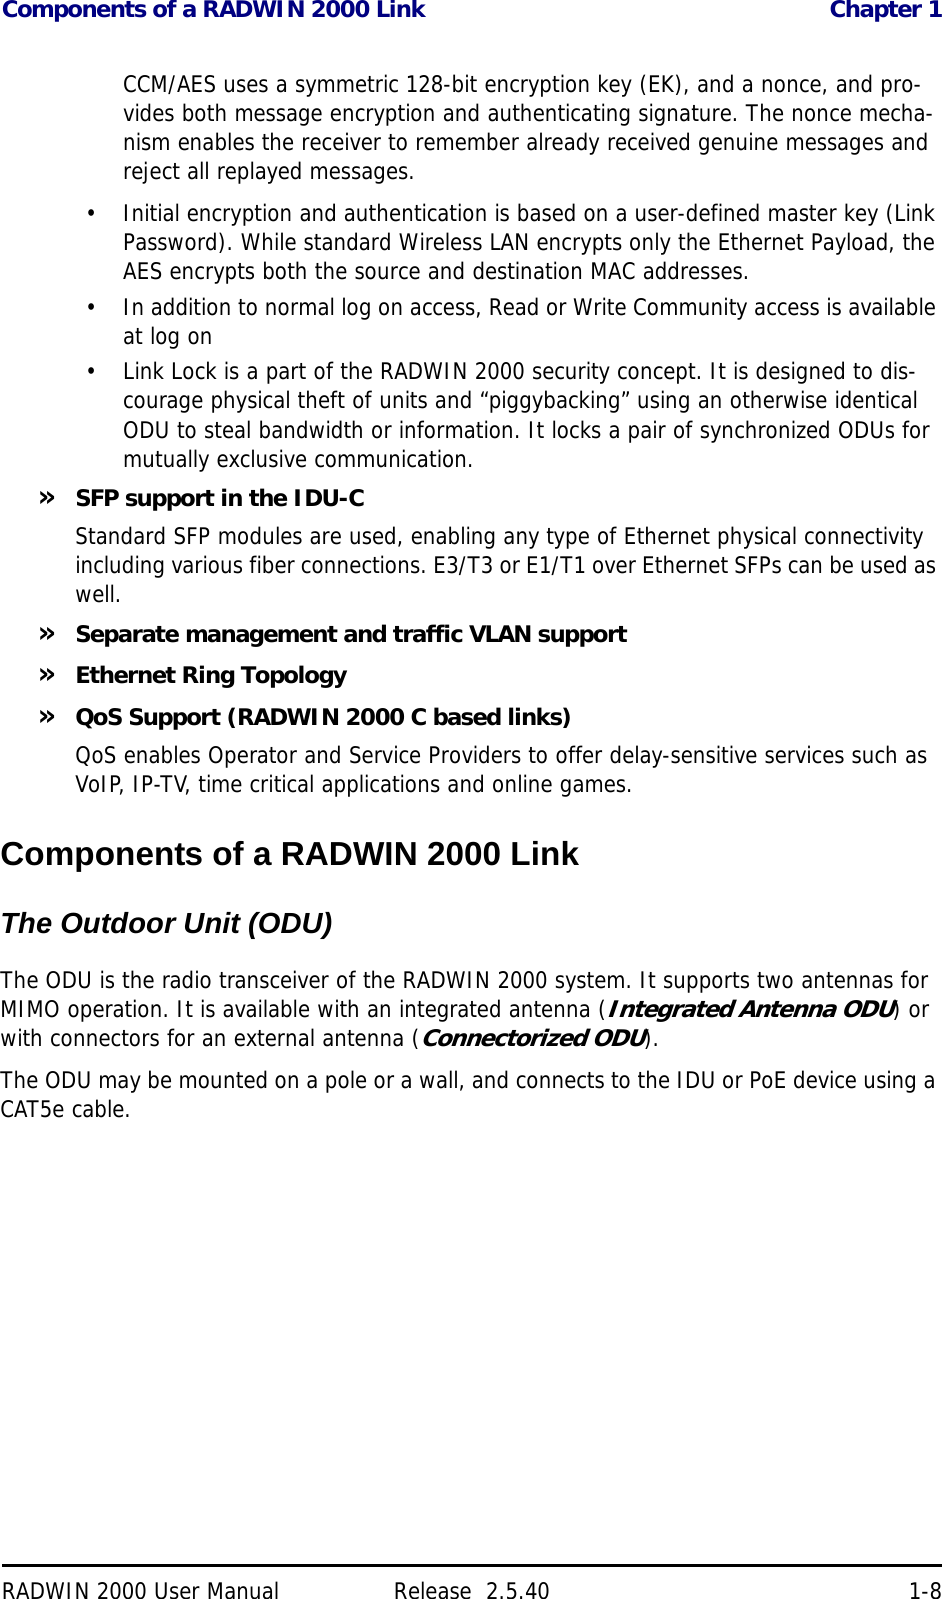 Components of a RADWIN 2000 Link Chapter 1RADWIN 2000 User Manual Release  2.5.40 1-8CCM/AES uses a symmetric 128-bit encryption key (EK), and a nonce, and pro-vides both message encryption and authenticating signature. The nonce mecha-nism enables the receiver to remember already received genuine messages and reject all replayed messages.• Initial encryption and authentication is based on a user-defined master key (Link Password). While standard Wireless LAN encrypts only the Ethernet Payload, the AES encrypts both the source and destination MAC addresses.• In addition to normal log on access, Read or Write Community access is available at log on• Link Lock is a part of the RADWIN 2000 security concept. It is designed to dis-courage physical theft of units and “piggybacking” using an otherwise identical ODU to steal bandwidth or information. It locks a pair of synchronized ODUs for mutually exclusive communication.»SFP support in the IDU-CStandard SFP modules are used, enabling any type of Ethernet physical connectivity including various fiber connections. E3/T3 or E1/T1 over Ethernet SFPs can be used as well.»Separate management and traffic VLAN support»Ethernet Ring Topology»QoS Support (RADWIN 2000 C based links)QoS enables Operator and Service Providers to offer delay-sensitive services such as VoIP, IP-TV, time critical applications and online games.Components of a RADWIN 2000 LinkThe Outdoor Unit (ODU)The Radio Outdoor Unit (ODU)The ODU is the radio transceiver of the RADWIN 2000 system. It supports two antennas for MIMO operation. It is available with an integrated antenna (Integrated Antenna ODU) or with connectors for an external antenna (Connectorized ODU).The ODU may be mounted on a pole or a wall, and connects to the IDU or PoE device using a CAT5e cable.